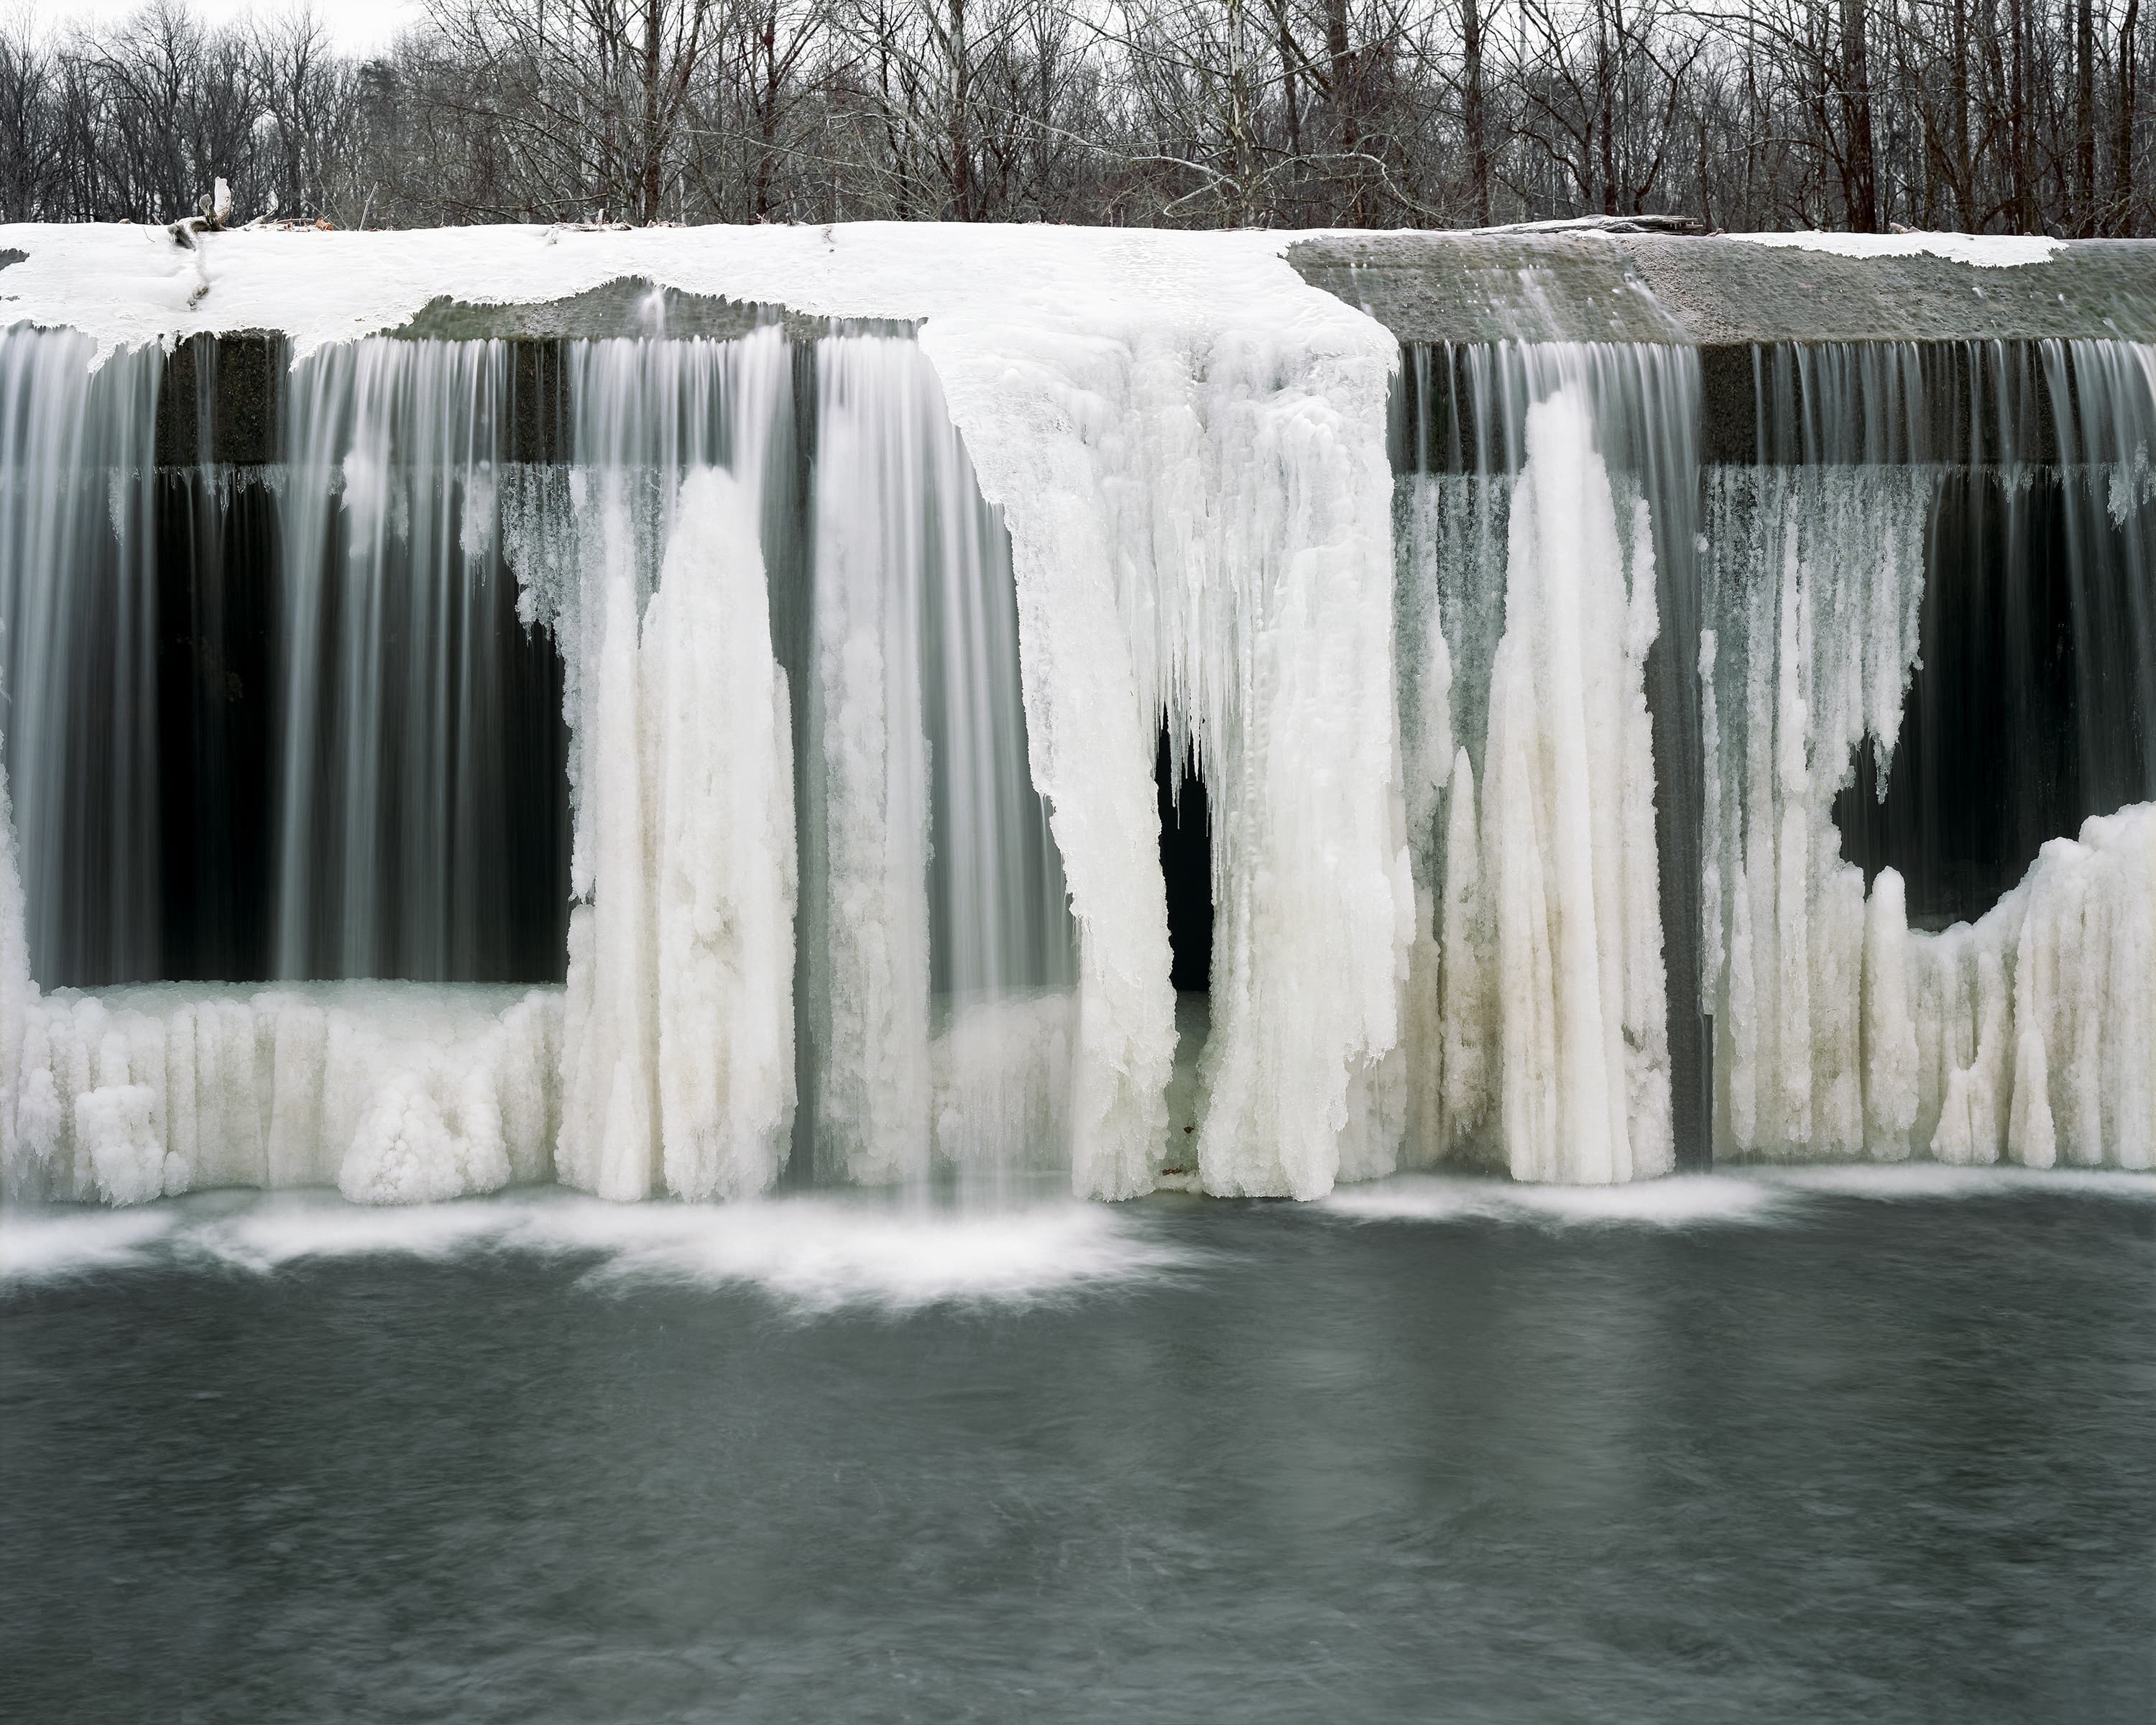 Water pouring over an ice covered dam.